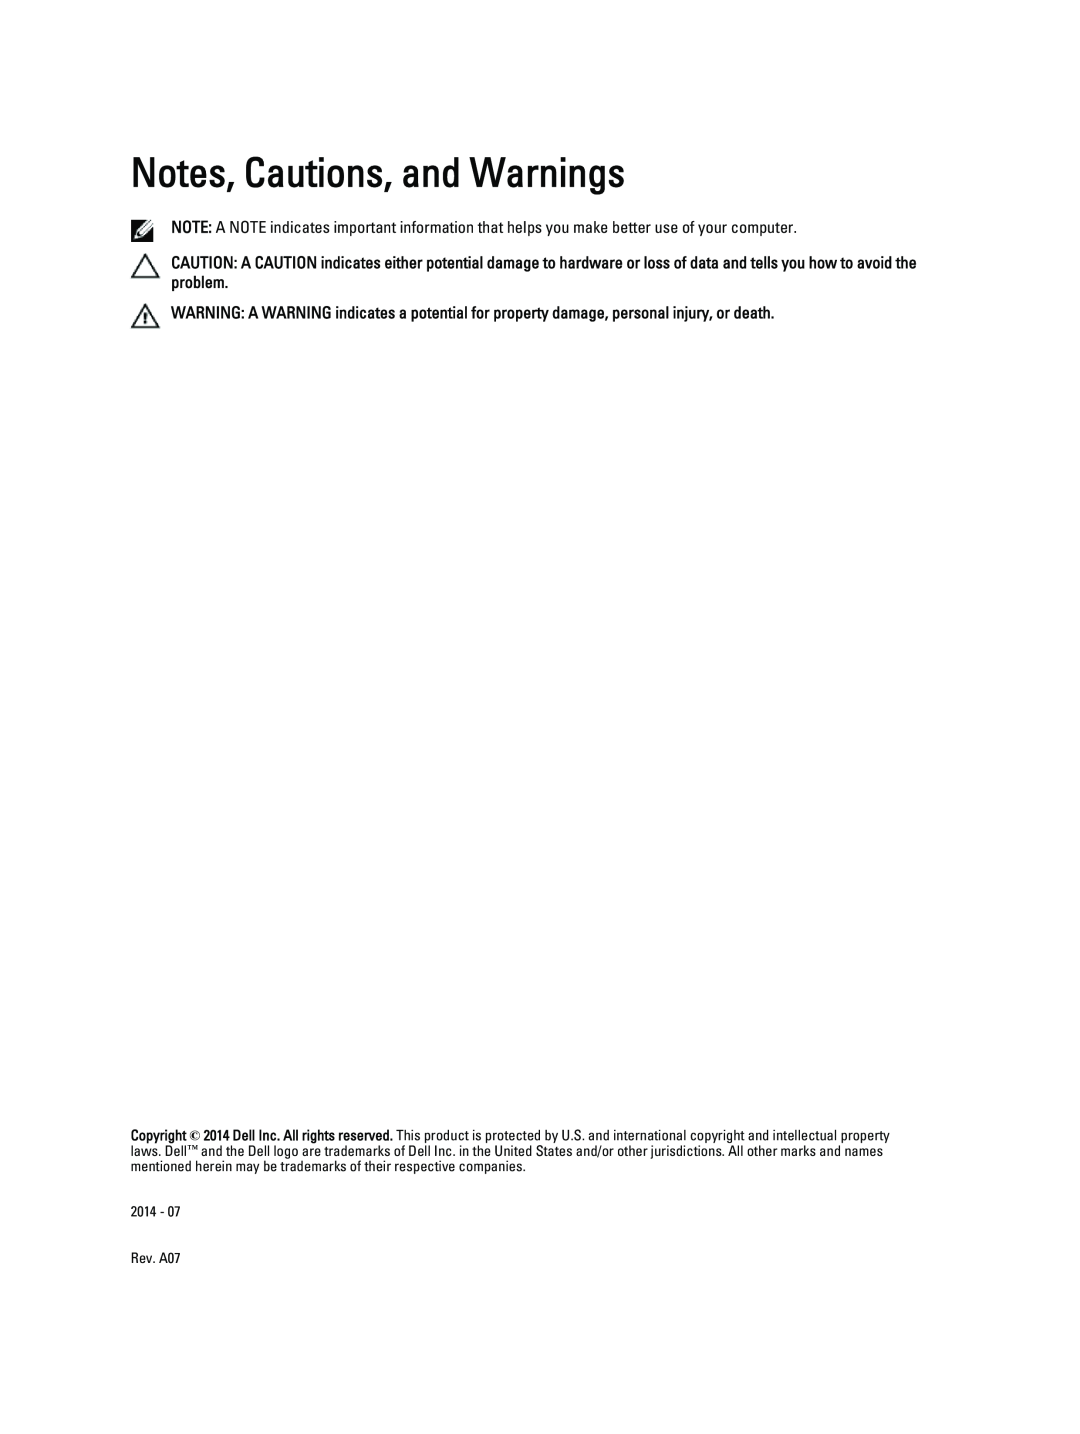 Dell R720XD owner manual Notes, Cautions, and Warnings 